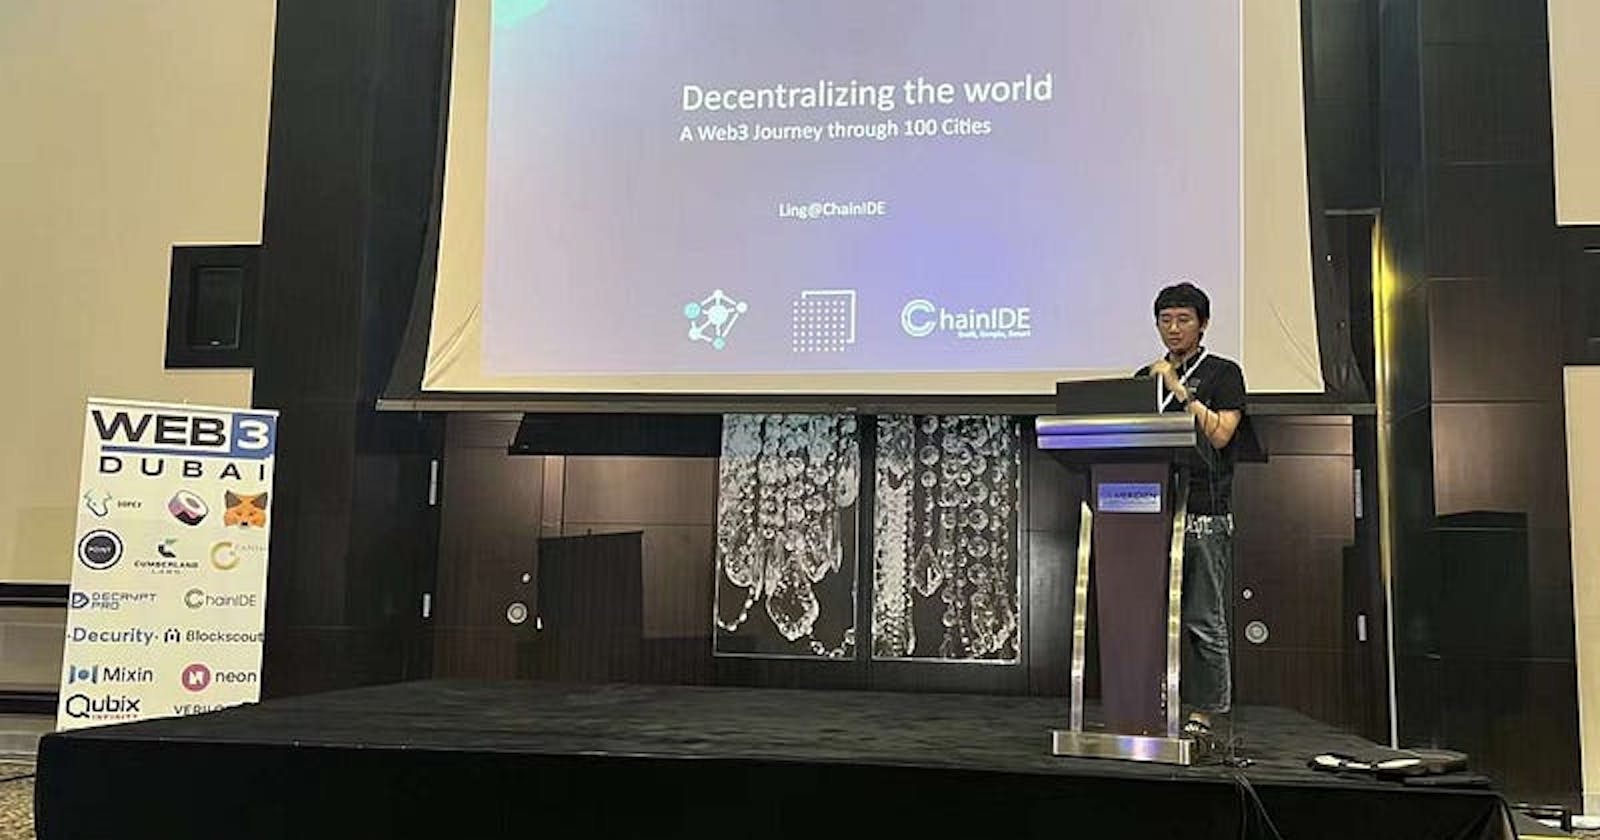 ChainIDE: Empowering Developers to Build the Future in the META Region